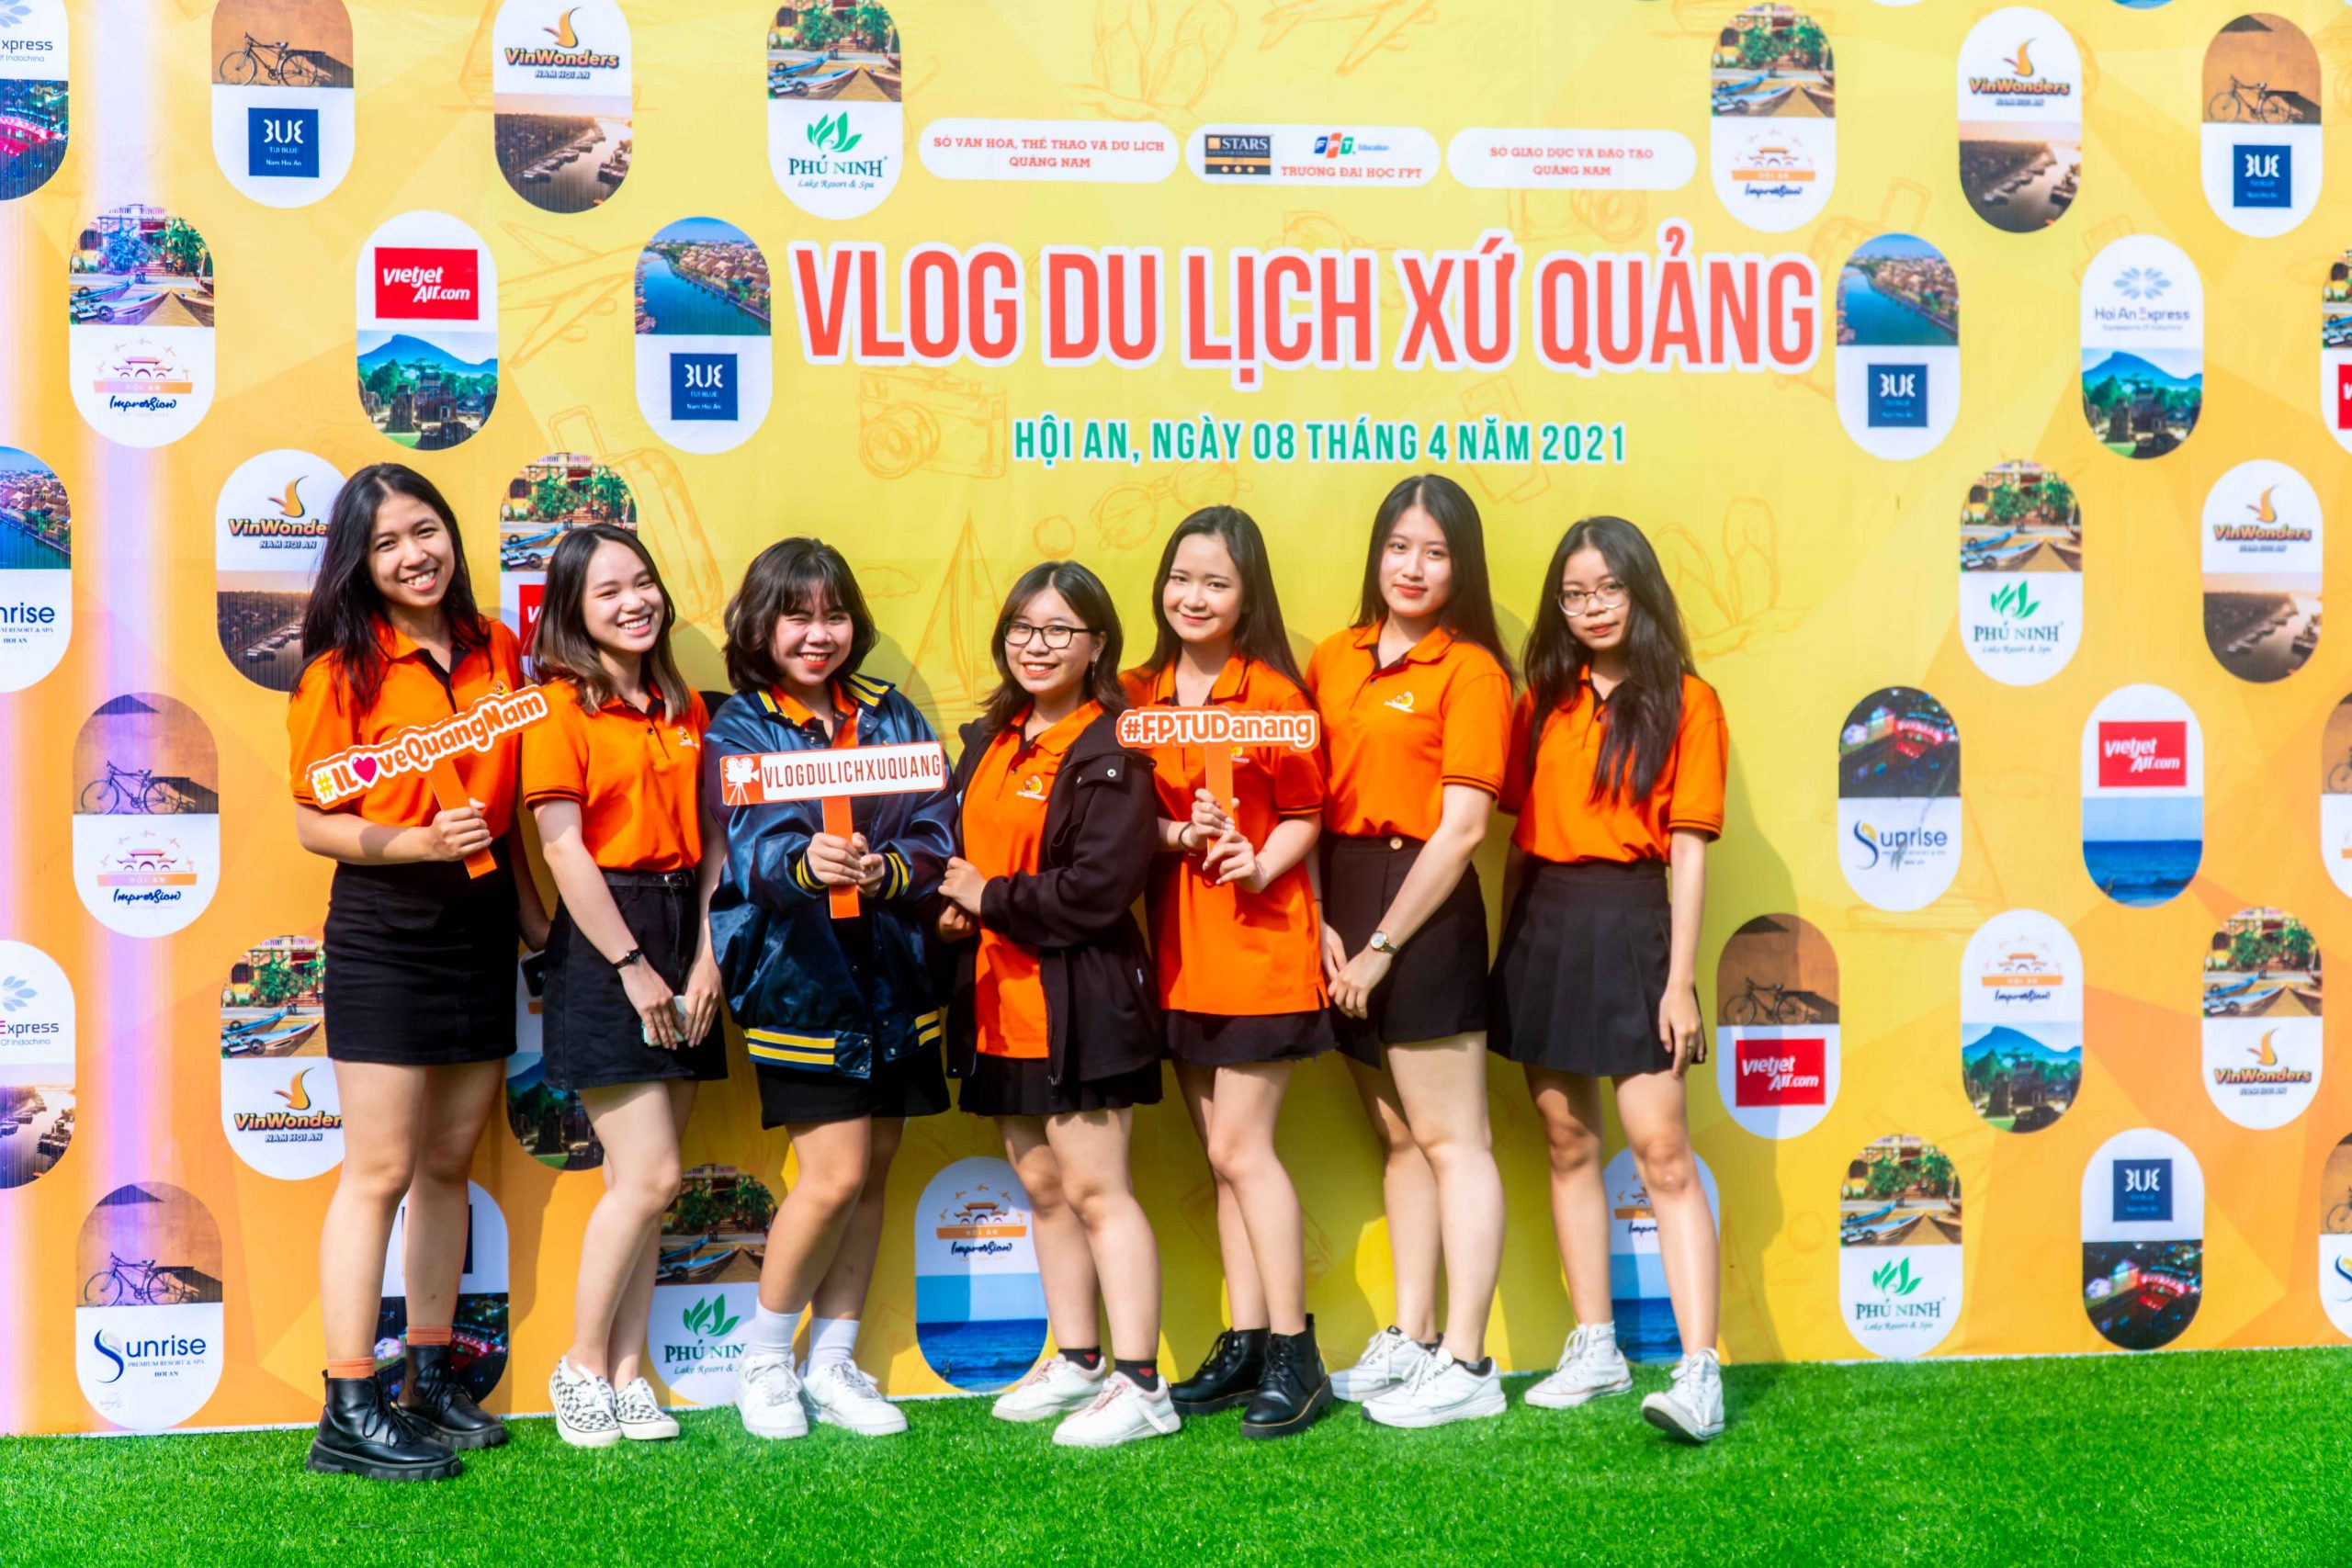 Extension of time to receive works of Quang tourism Vlog contest until the end of July 20